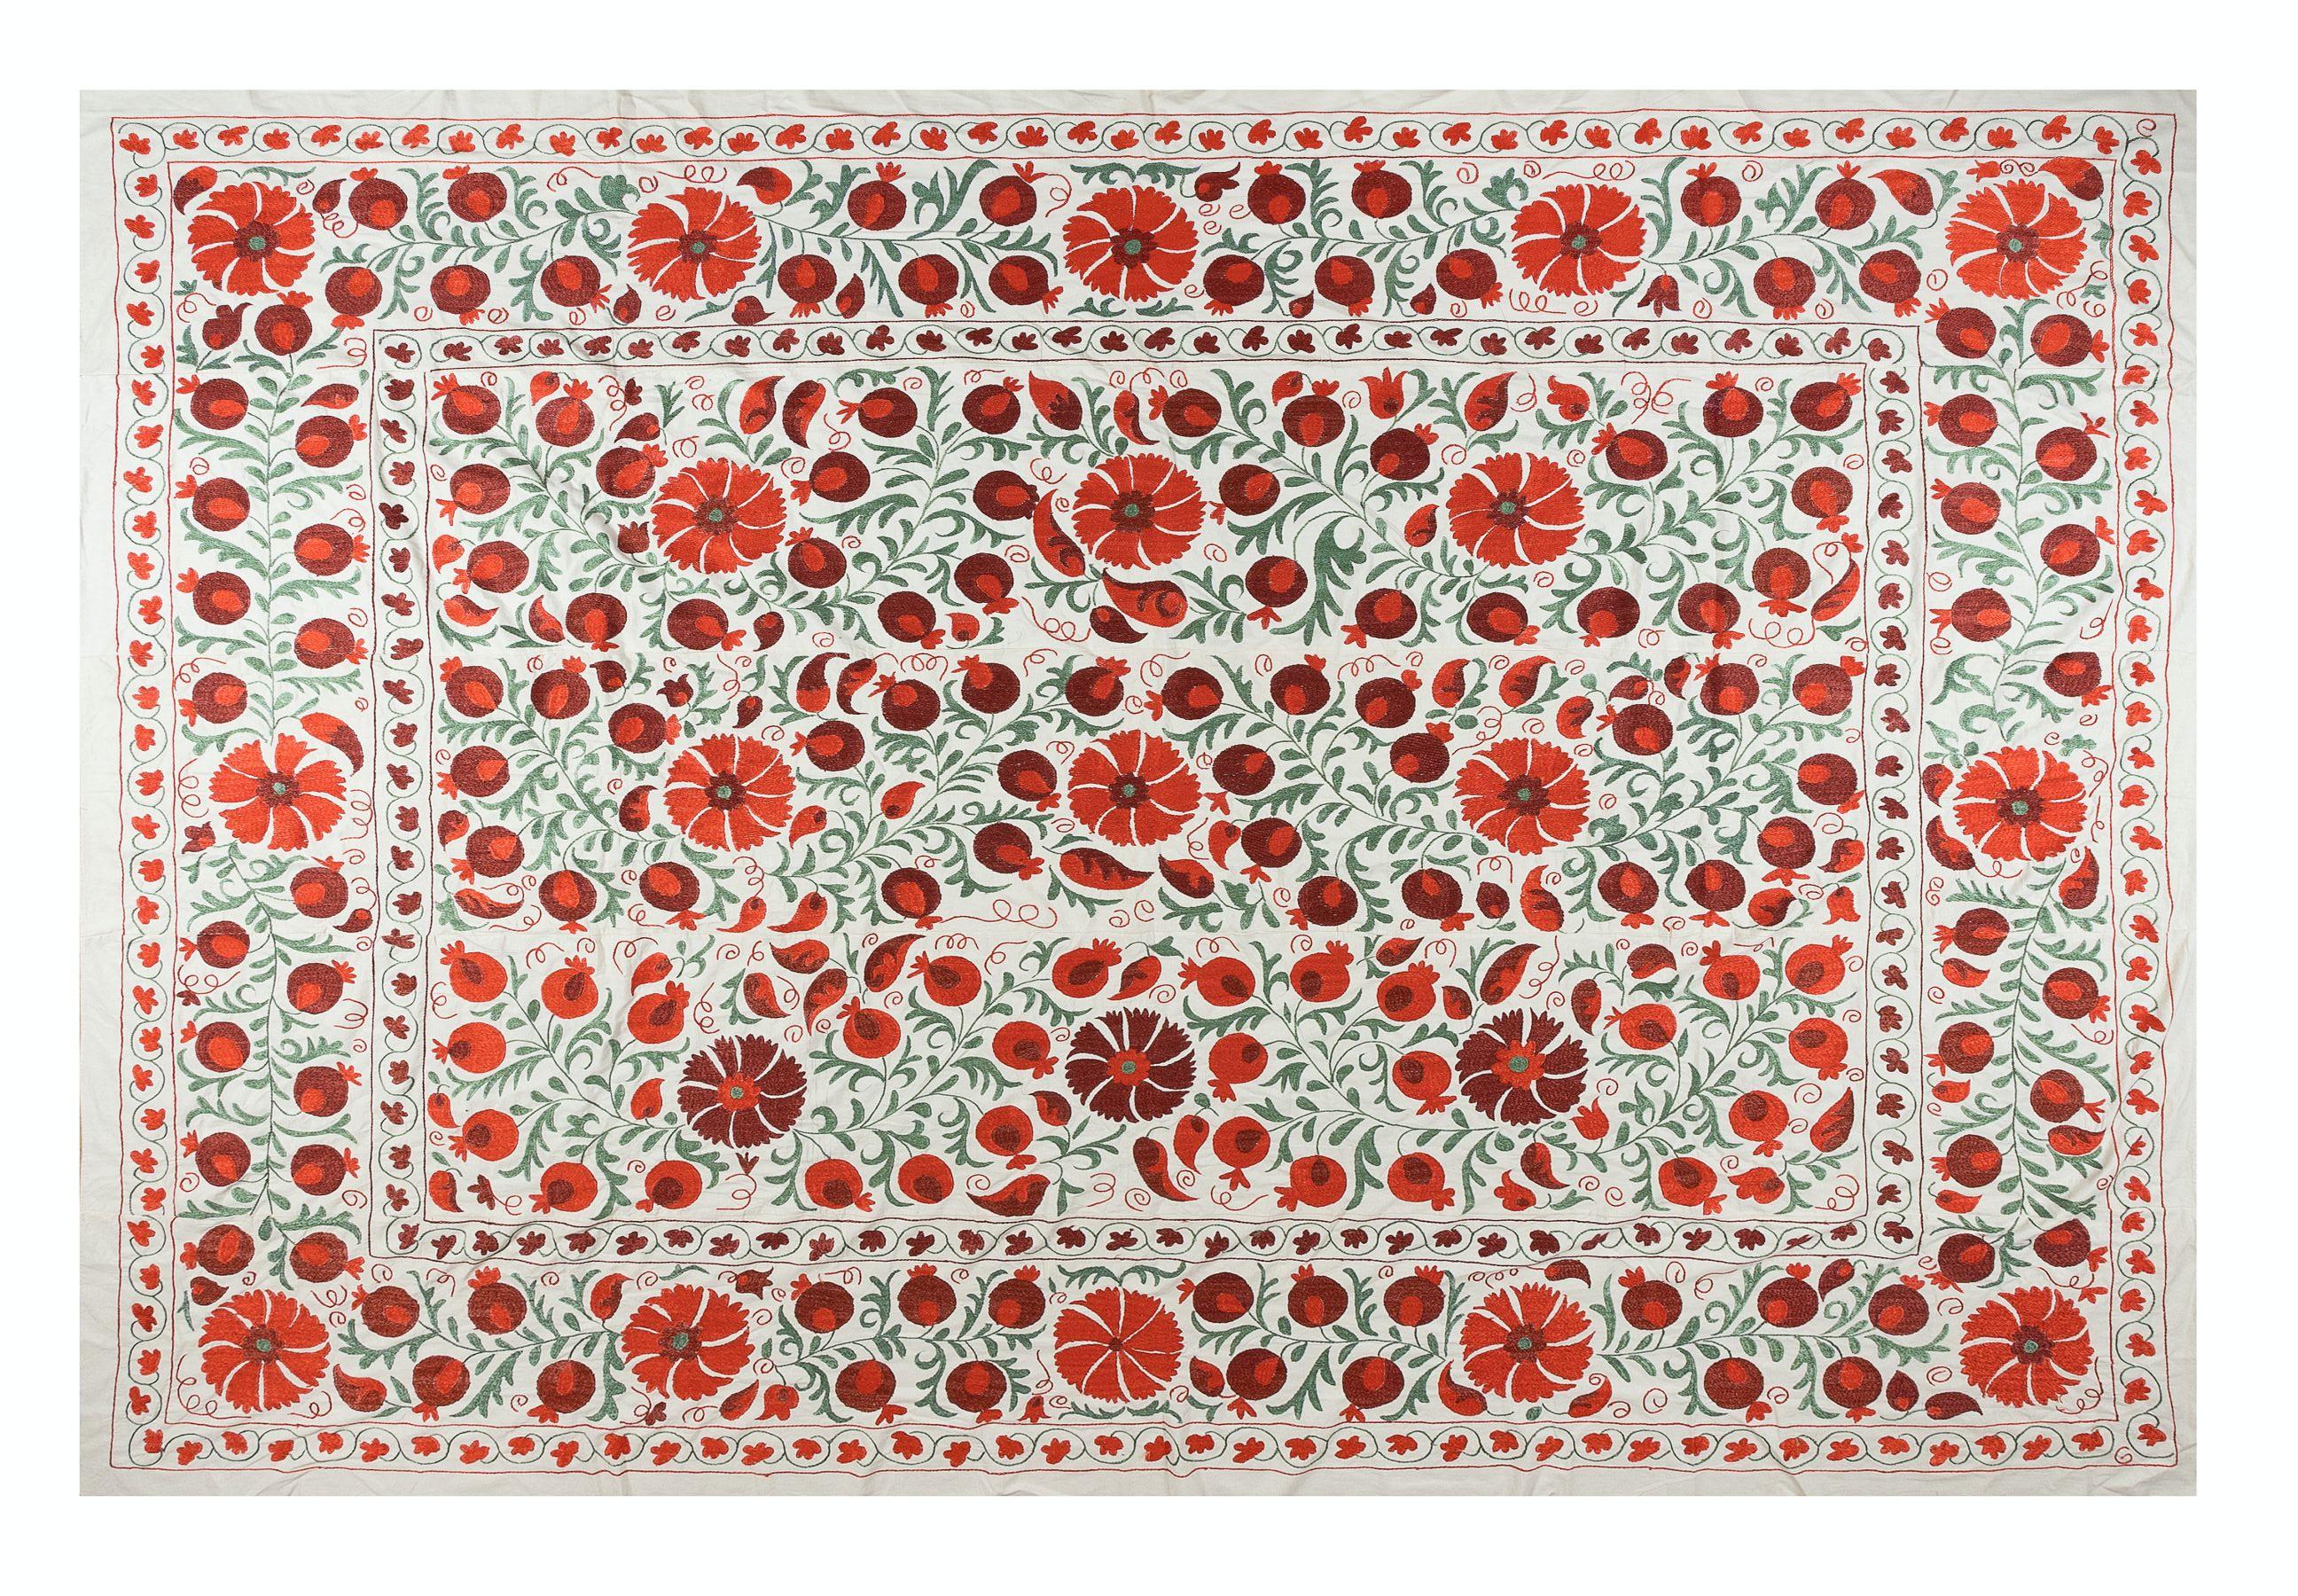 Contemporary 8x9.9 Ft Decorative Uzbek Bedspread, Silk Hand Embroidery Suzani Wall Hanging For Sale